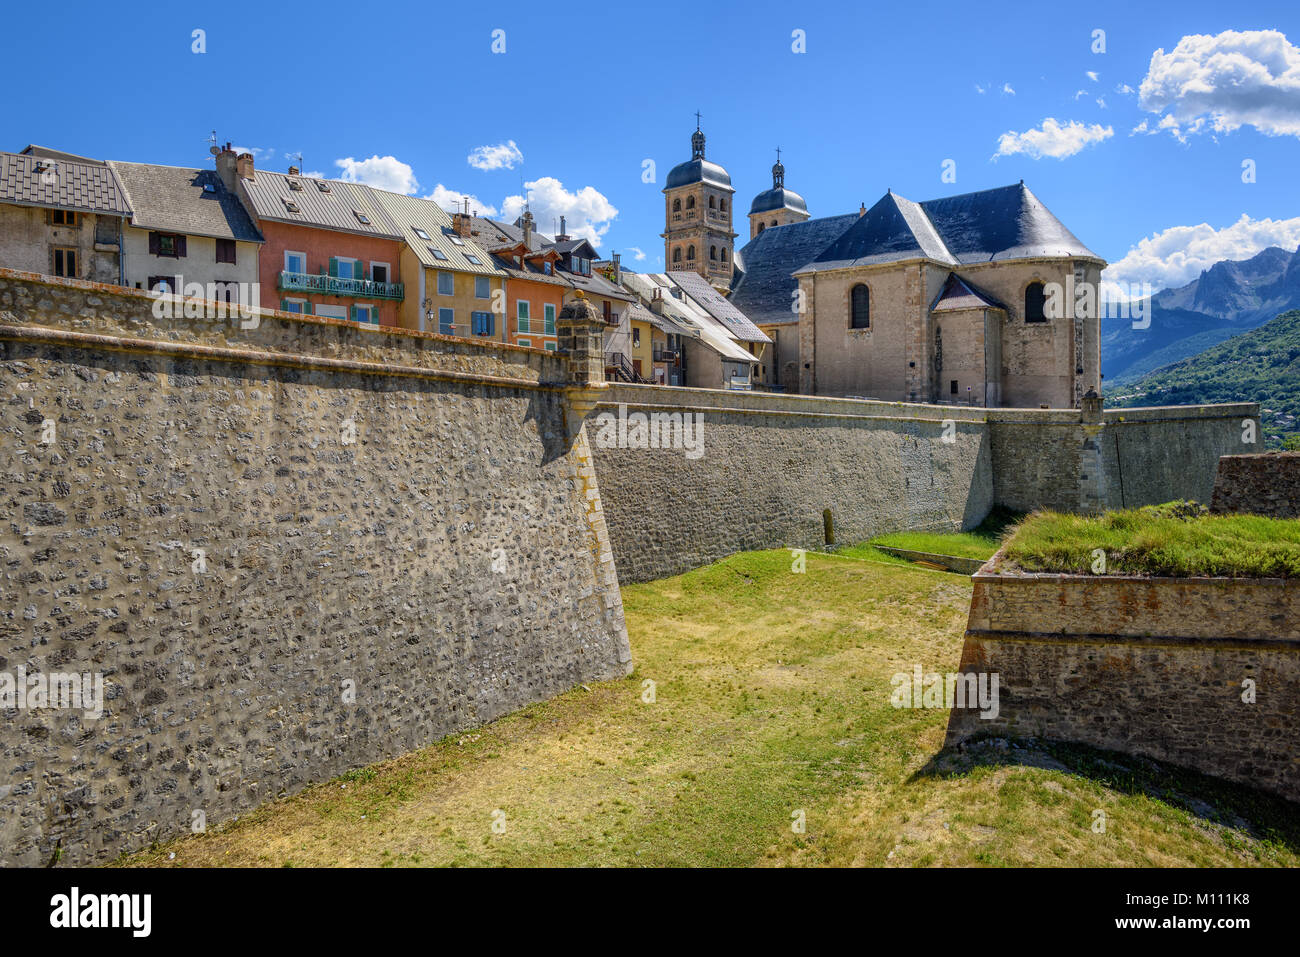 The City Walls of the Old Town of Briancon, built by Vauban, are Unesco World Culture Heritage site. Briancon is the highest city in France. Stock Photo